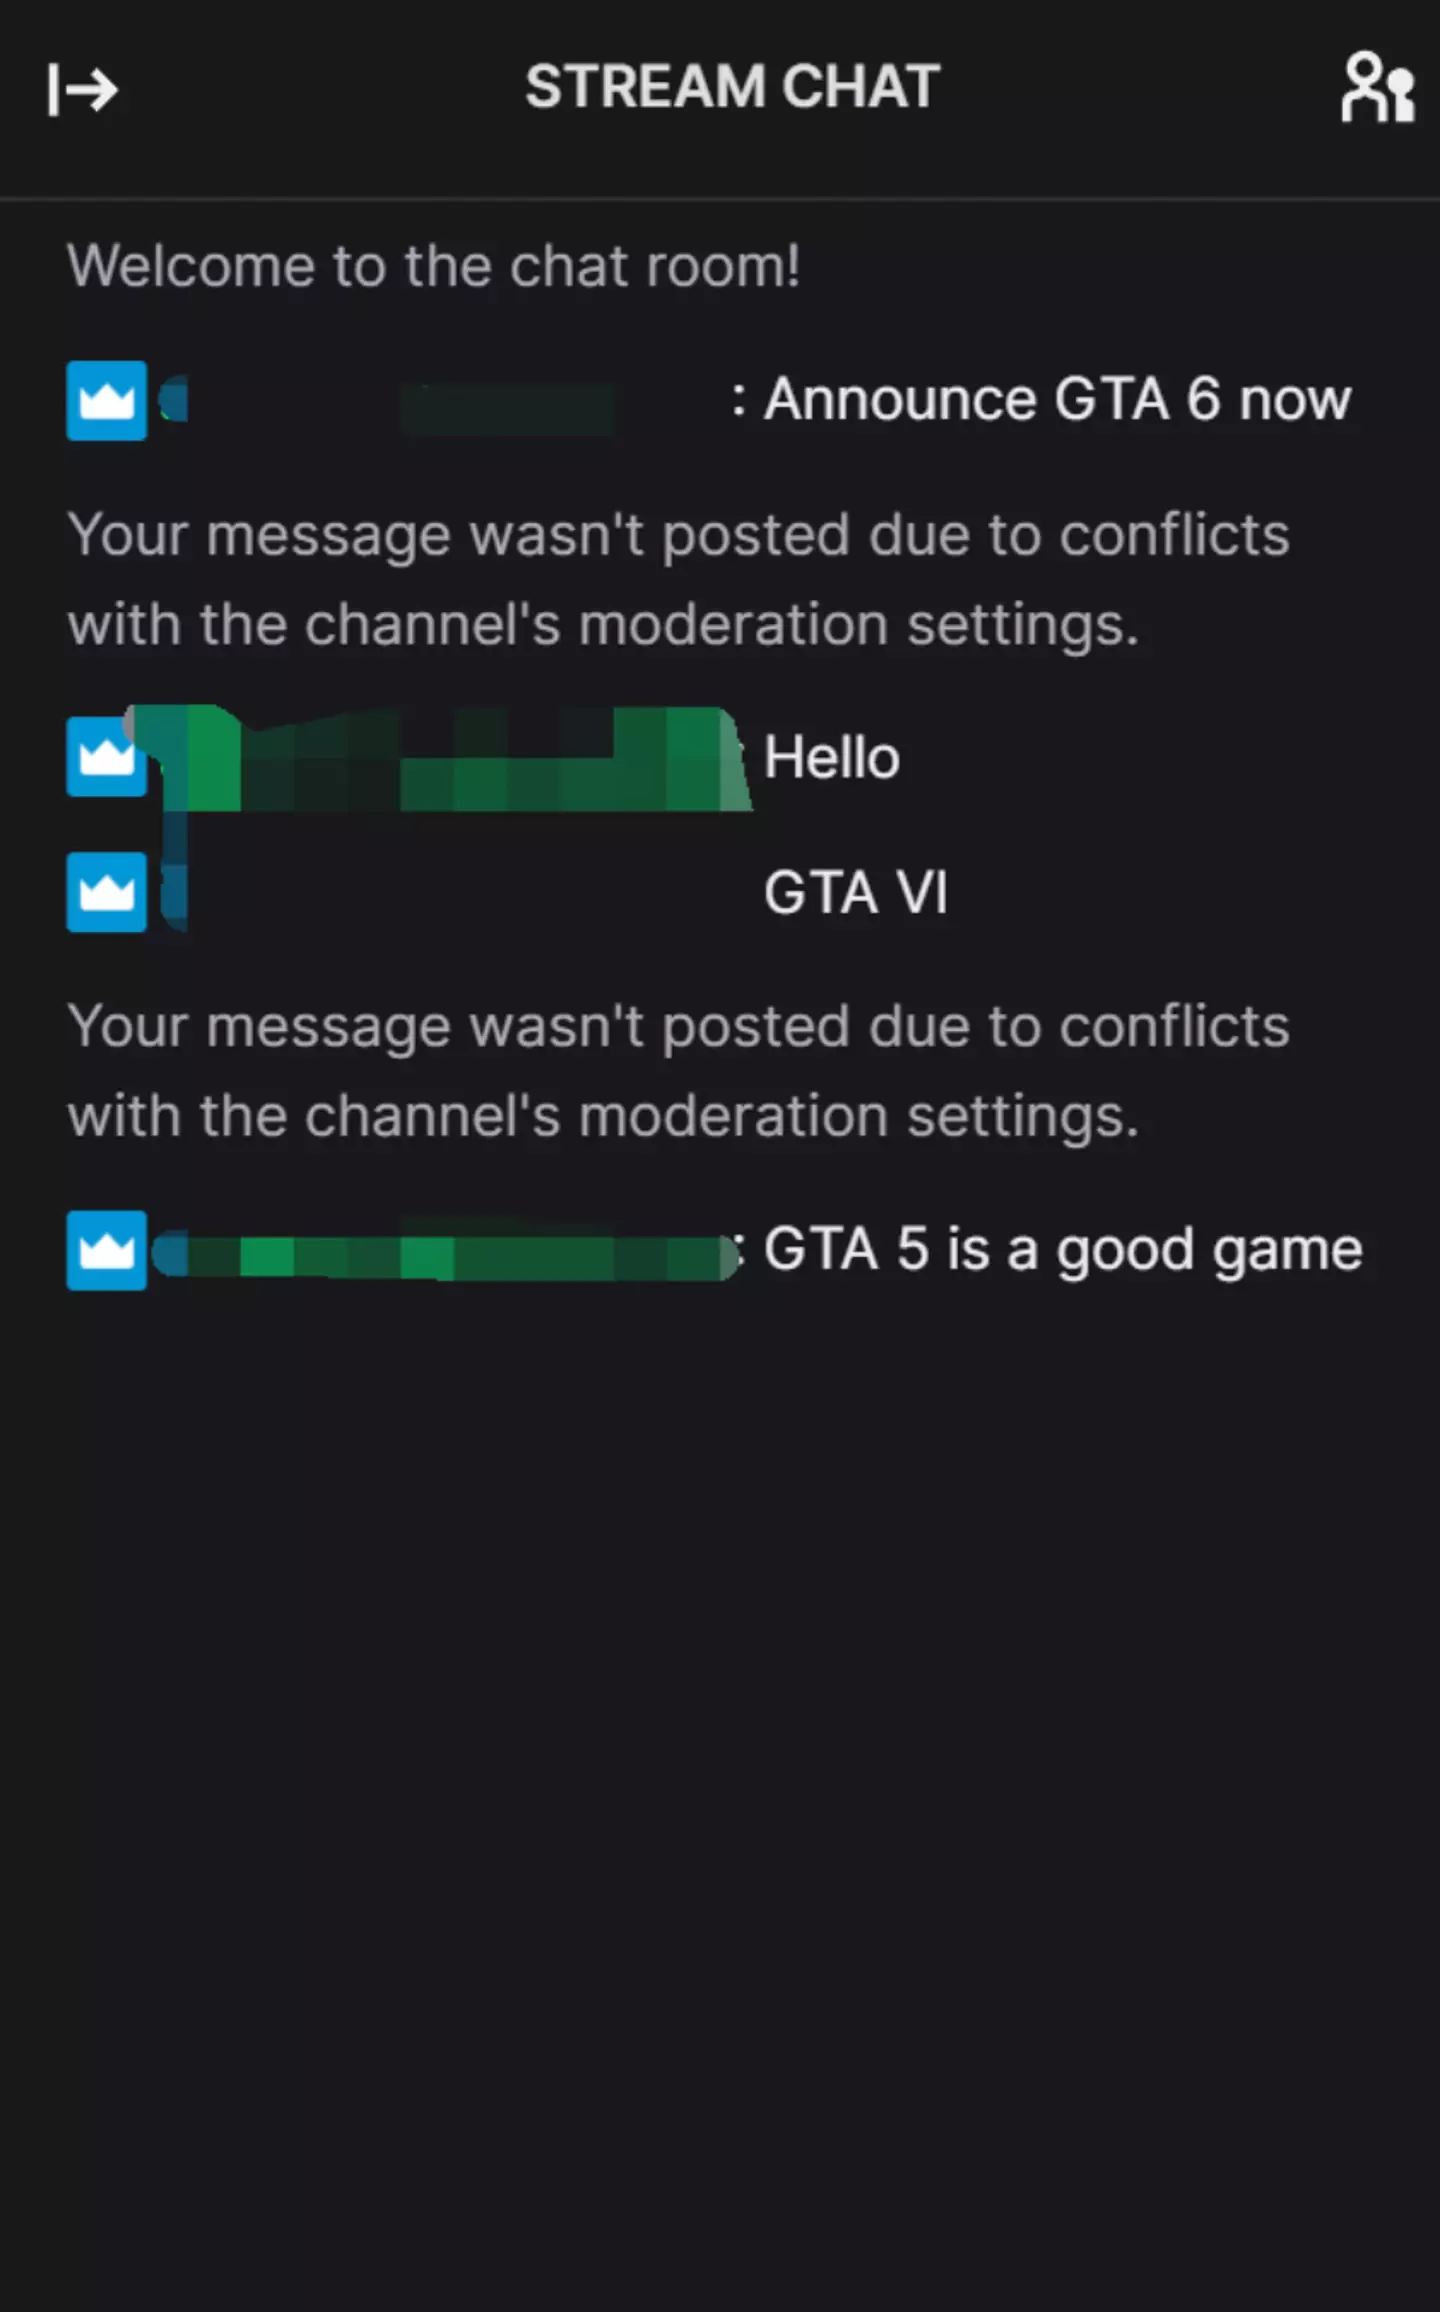 Rockstar appears to have banned people from talking about GTA 6 on Twitch.